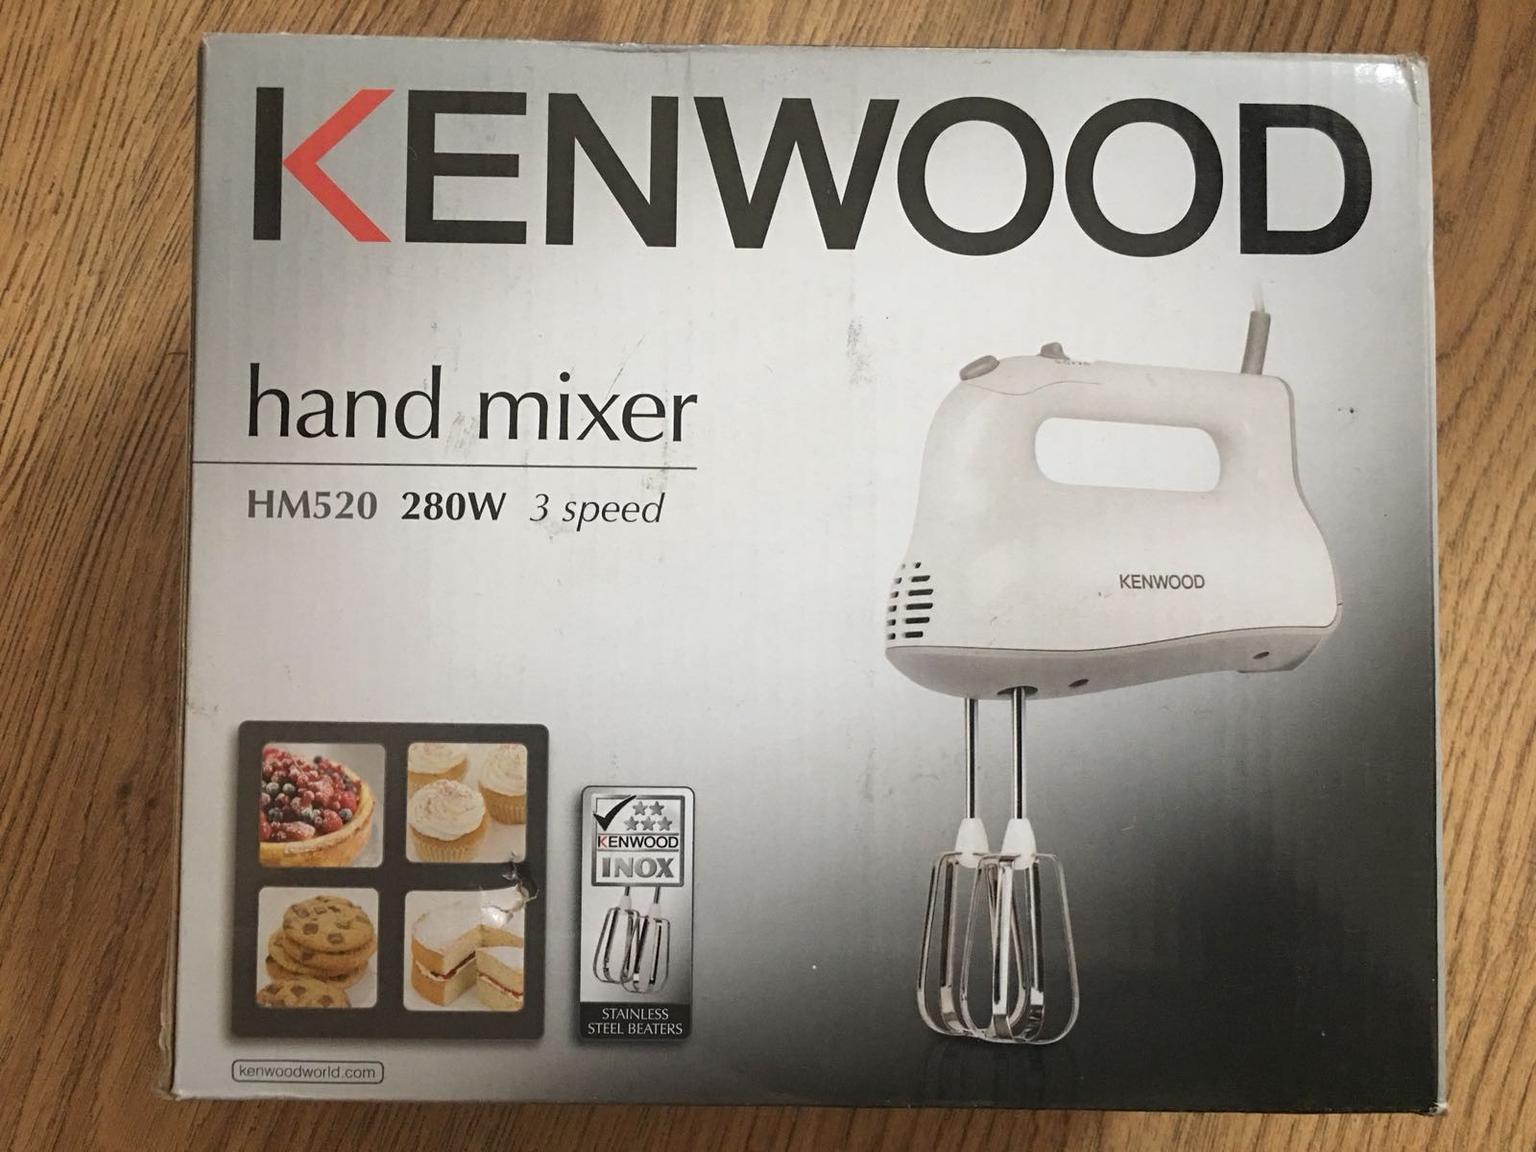 Kenwood Hand Mixer HM520 3 Speed 280W UK SELLER WITH UK PLUG BRAND NEW BOXED